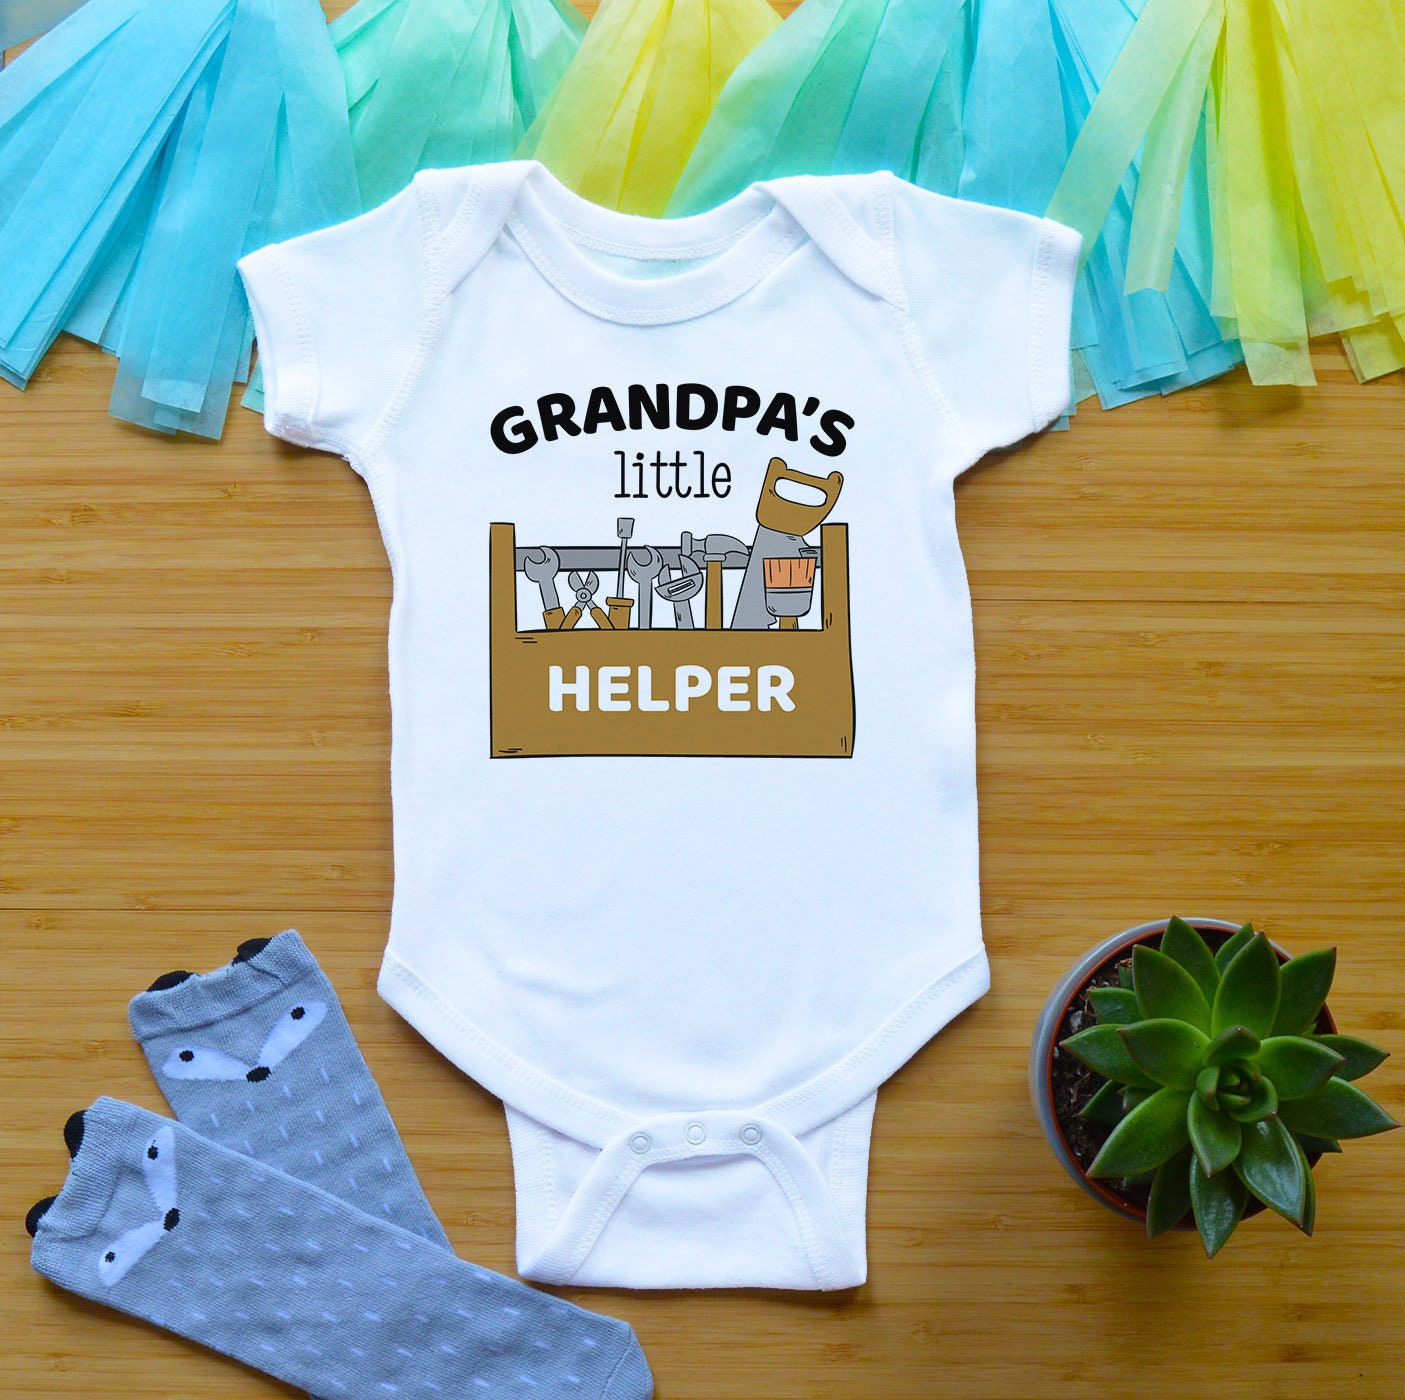 Grandpa's Little Helper Baby Outfit, Grandfather Baby Shower Gift